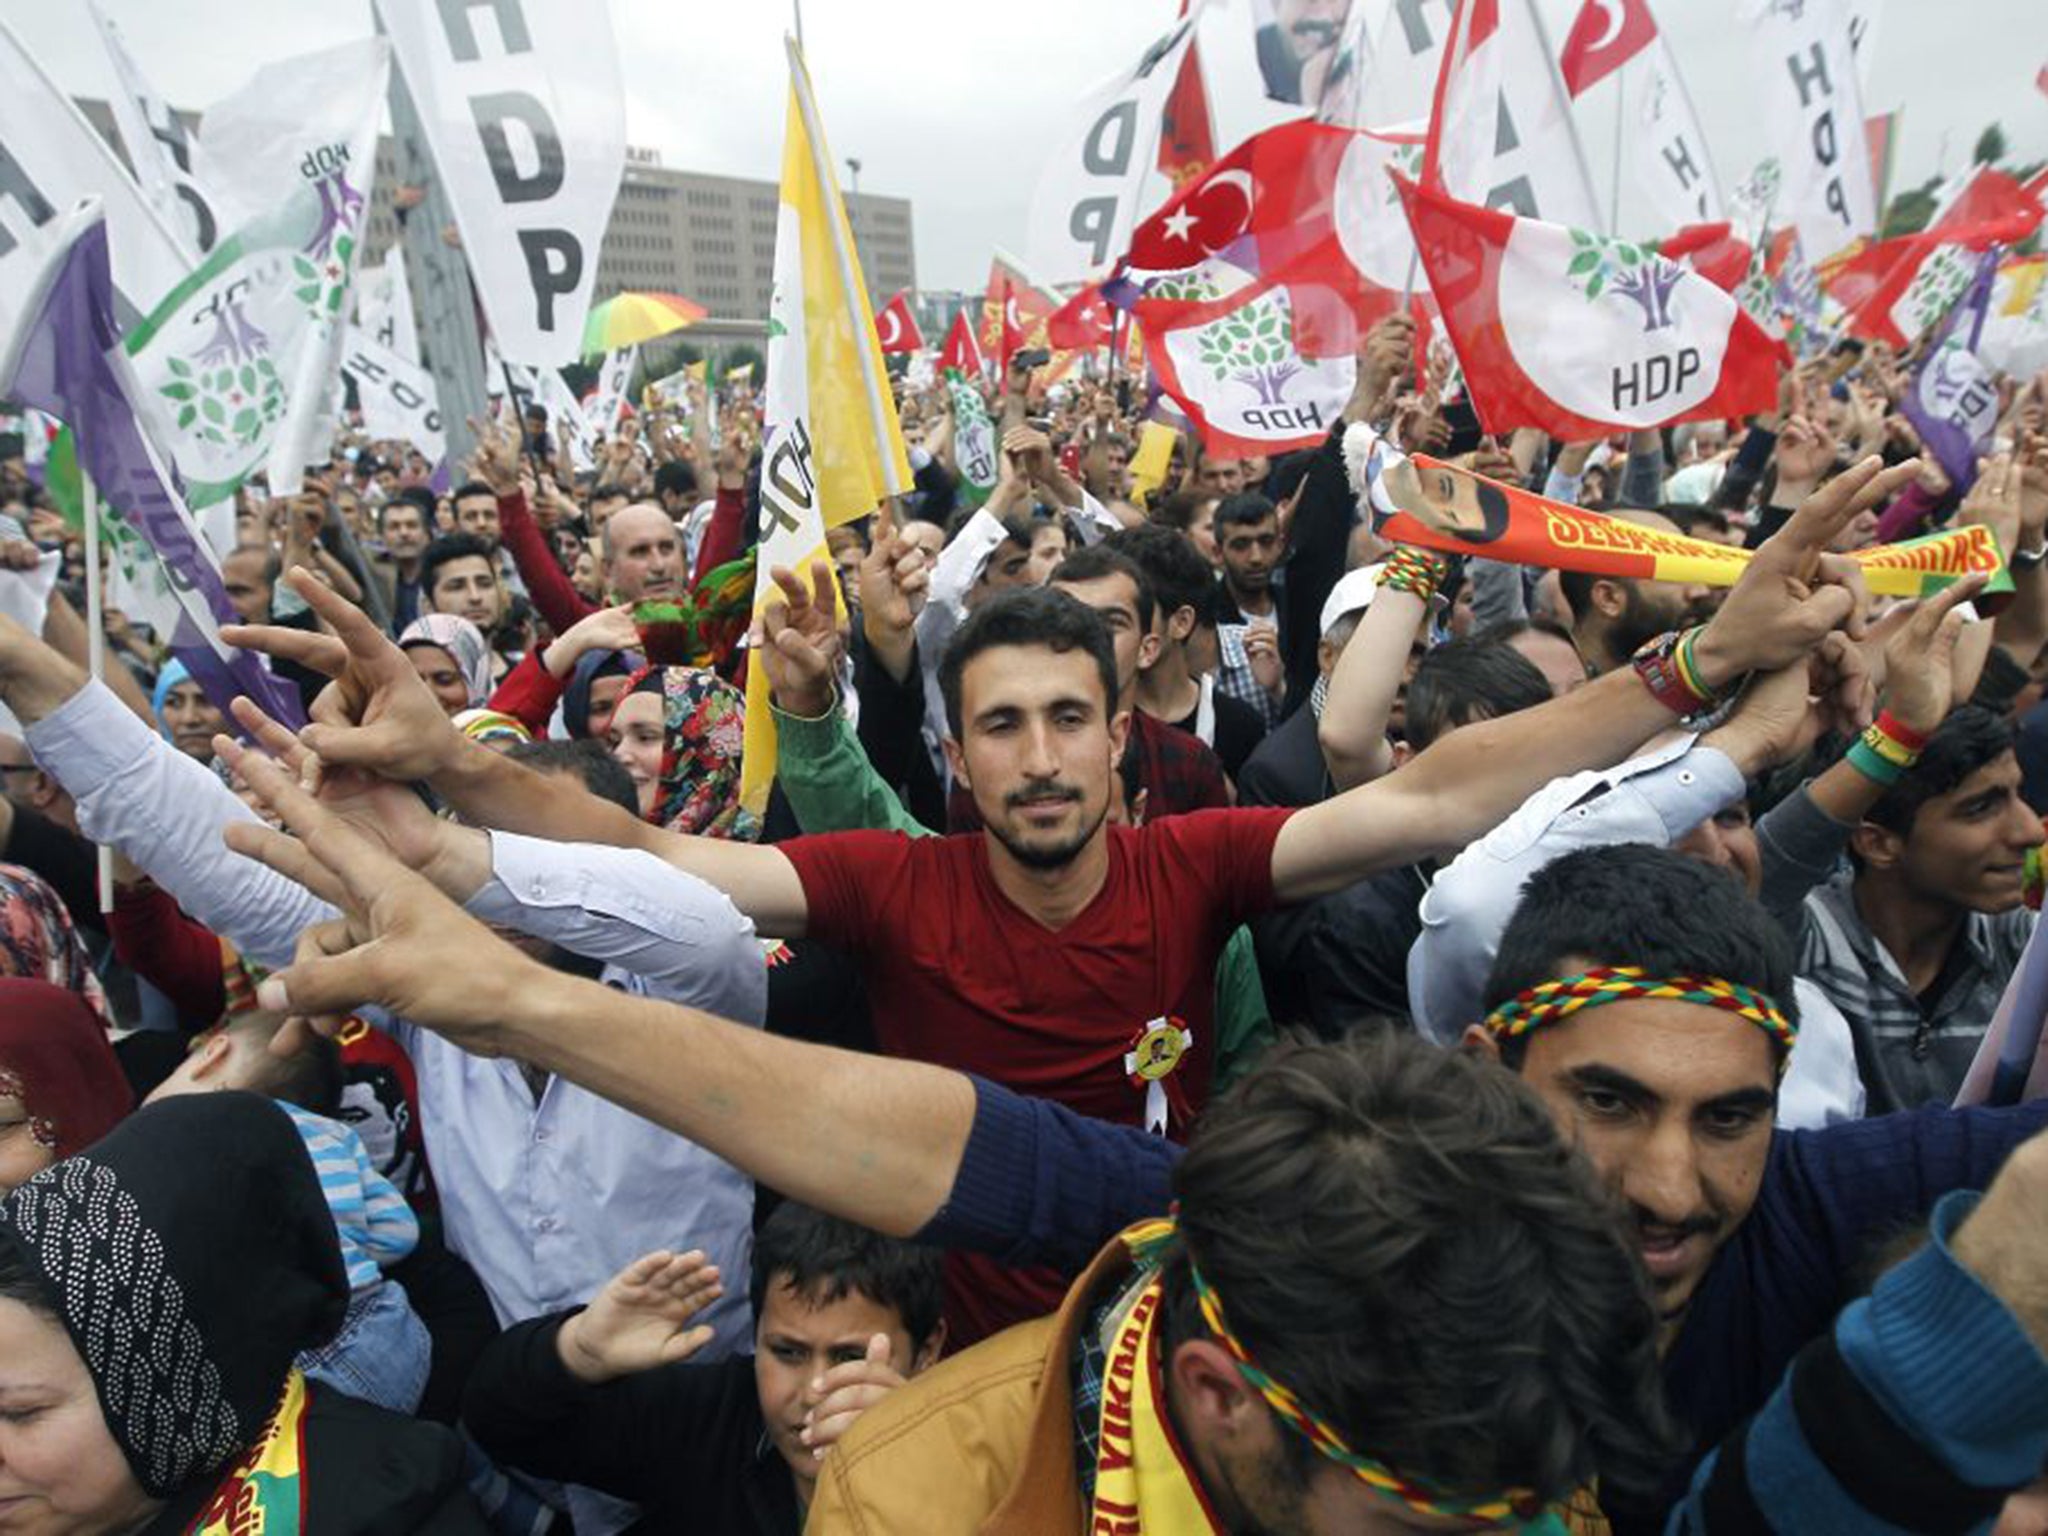 The main opposition to Erdogan's AK party, the pro-Kurdish People's Democracy Party HDP, received 13.12 per cent of the vote in the June 7 elections, giving it 80 seats on its debut in the Turkish parliament